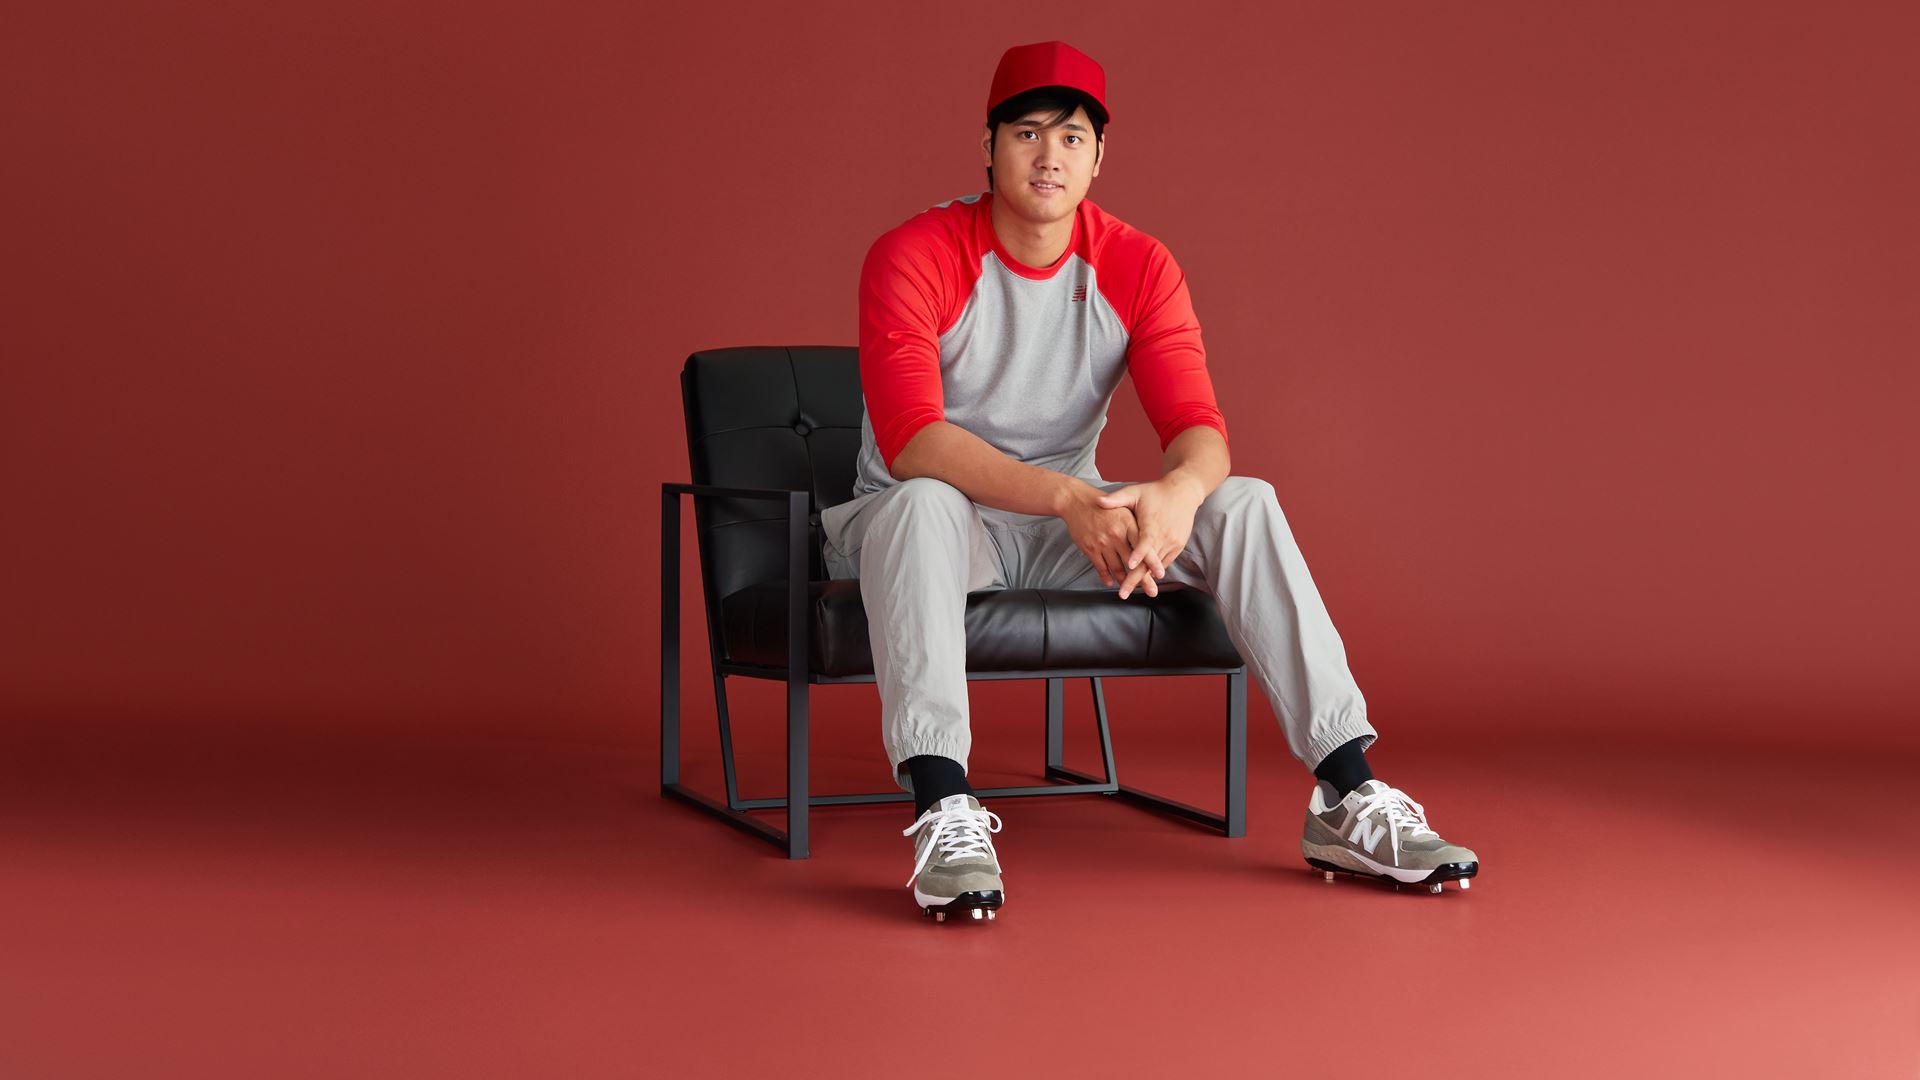 Ohtani's new gear (NB everything & Chandler bat) a.k.a. New Balance  strategically placing their logo so it's always on screen. Manfred better  not get ideas for more ad space on jerseys from